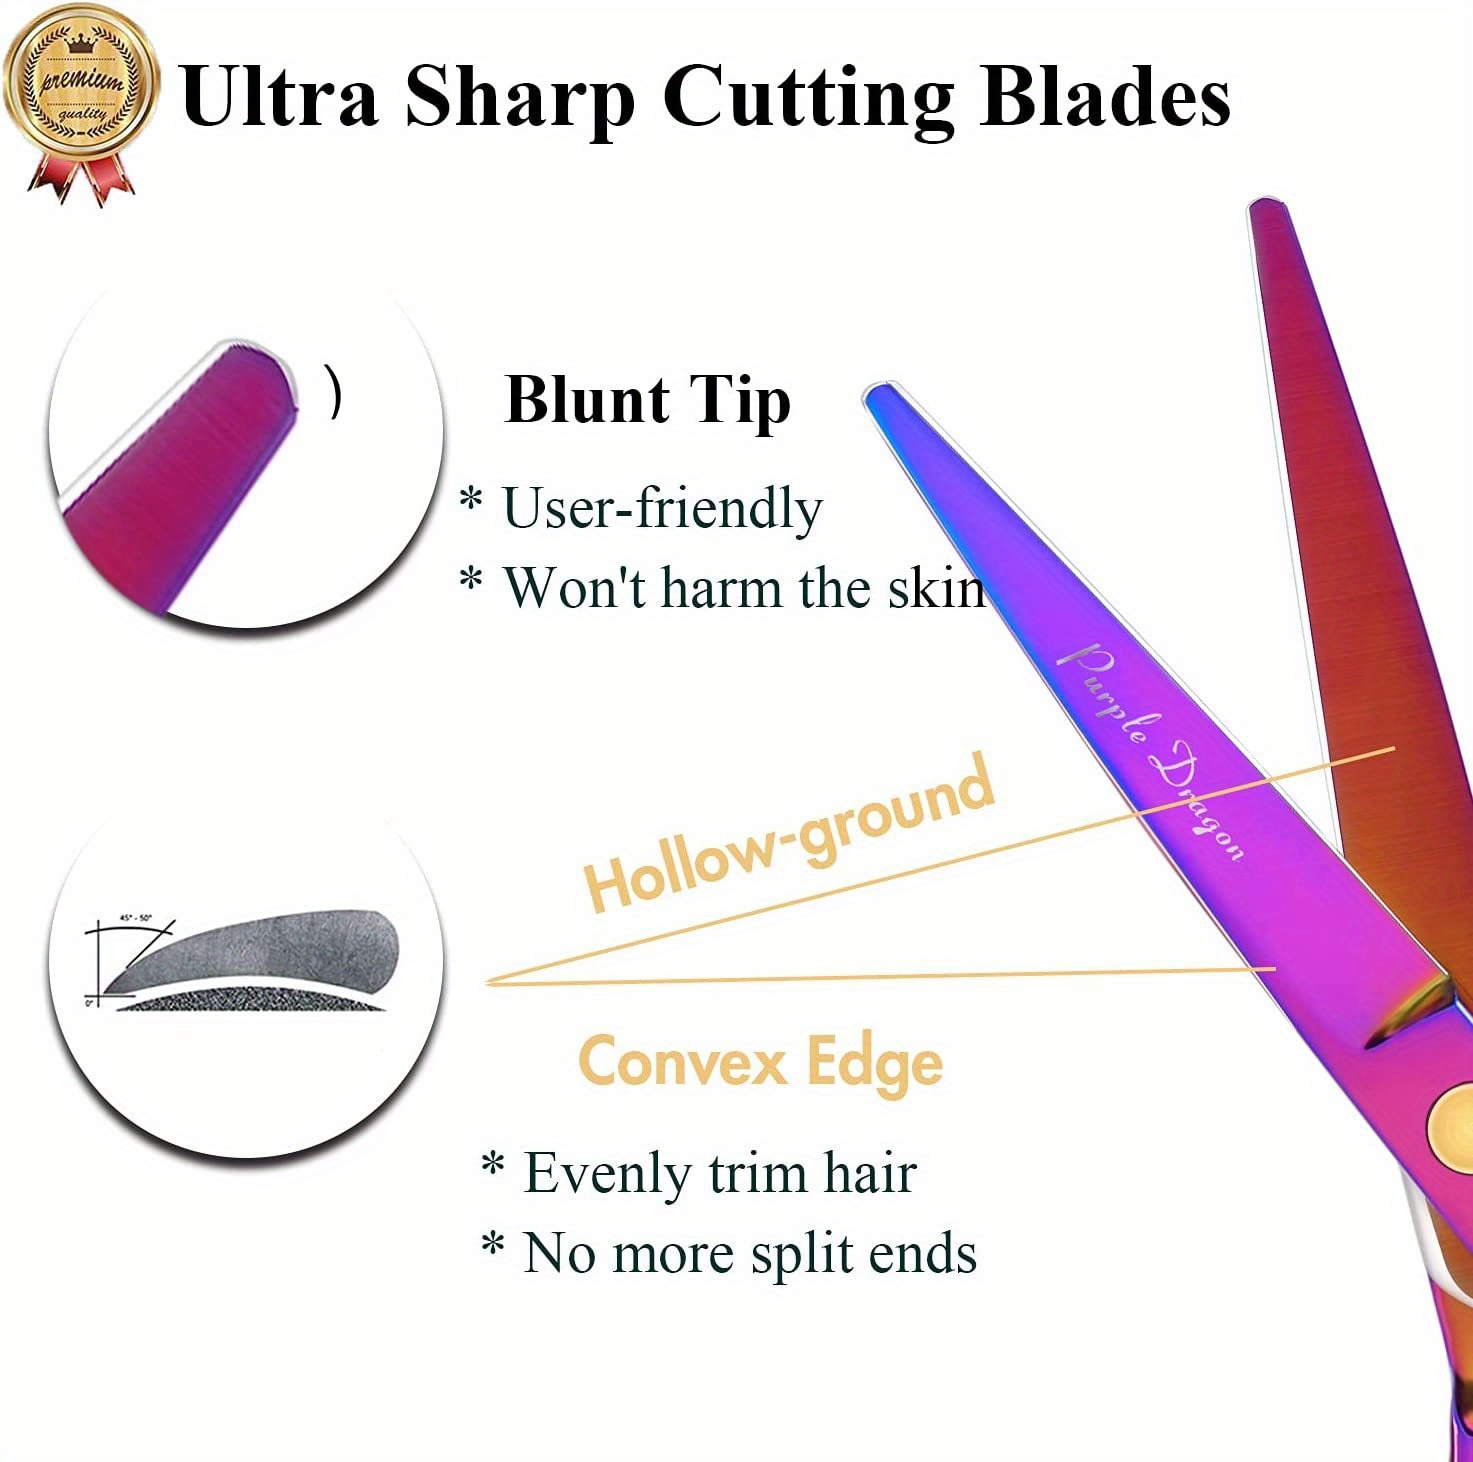 5 5 inch purple hair cutting scissors set with razor pu leather scissors case barber hair cutting shears hair thinning texturizing shears for professional hairdresser or home use multi colored details 2